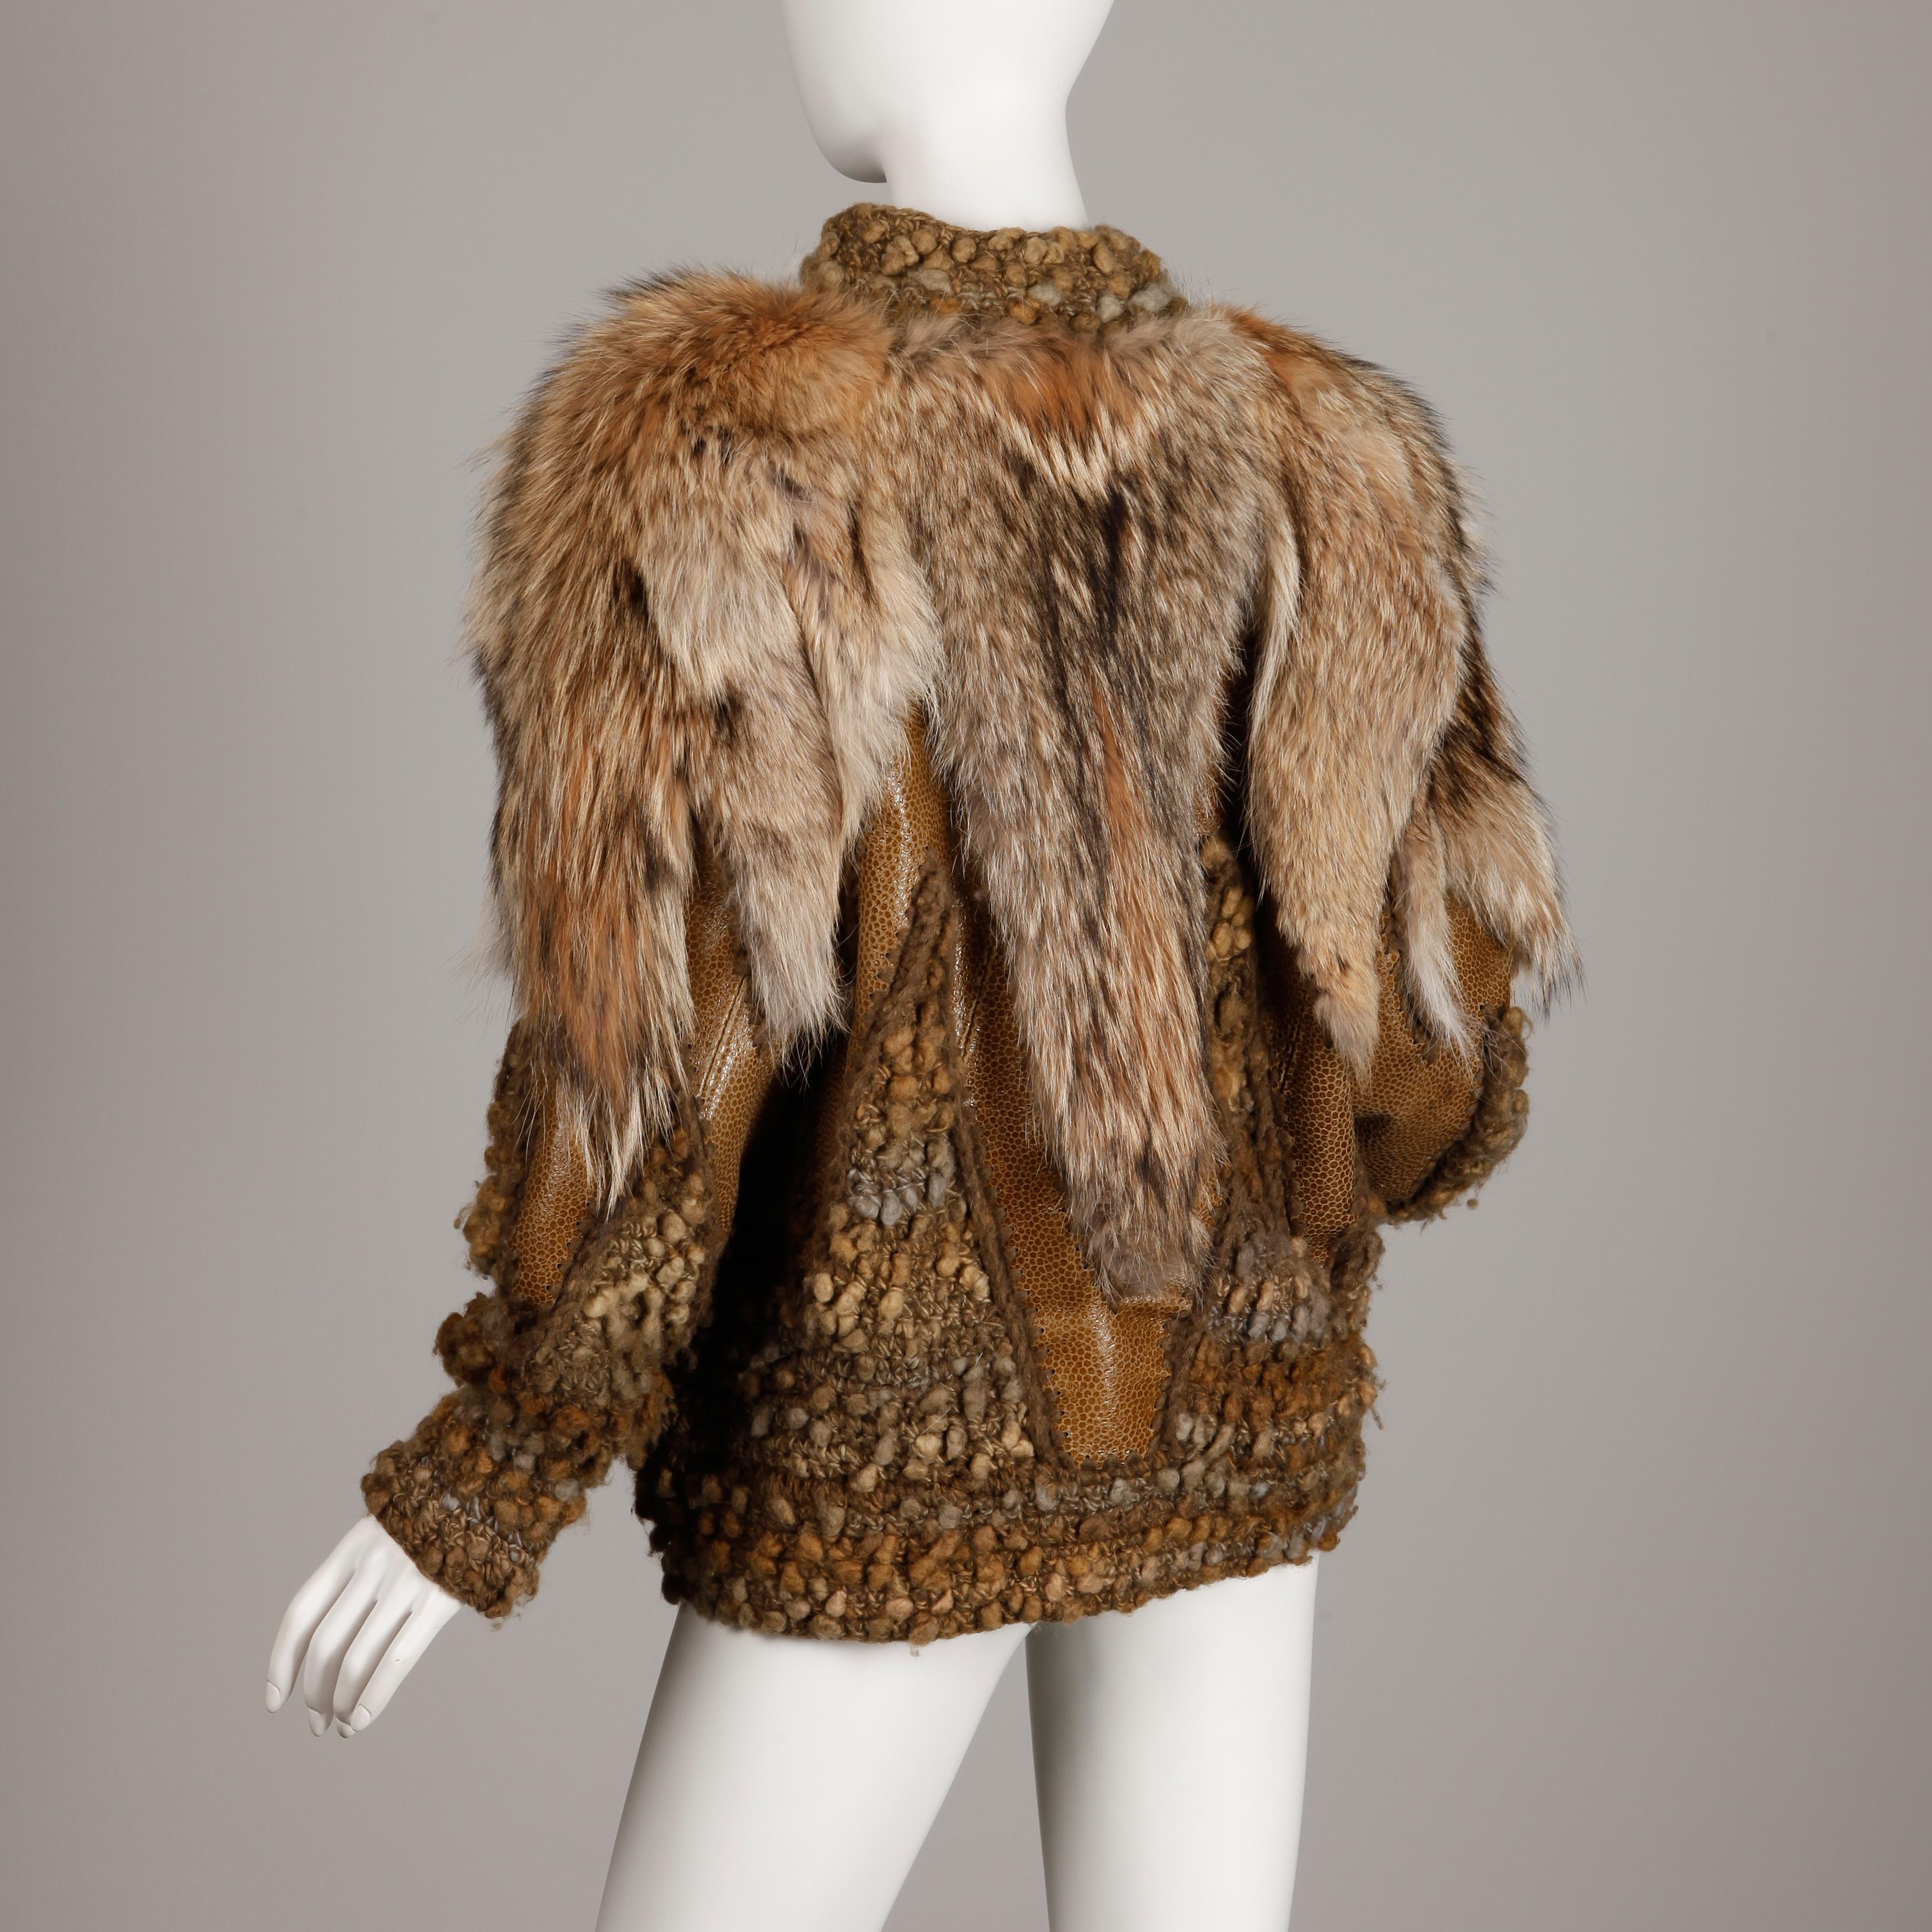 Unique vintage 1980s coyote fur and leather knit jacket with a zip up front from the estate of Pamela Lewis (Jerry Lewis/ Gary Lewis). Unlined with patchwork construction and dolman sleeves. The marked size is medium but the jacket will fit sizes